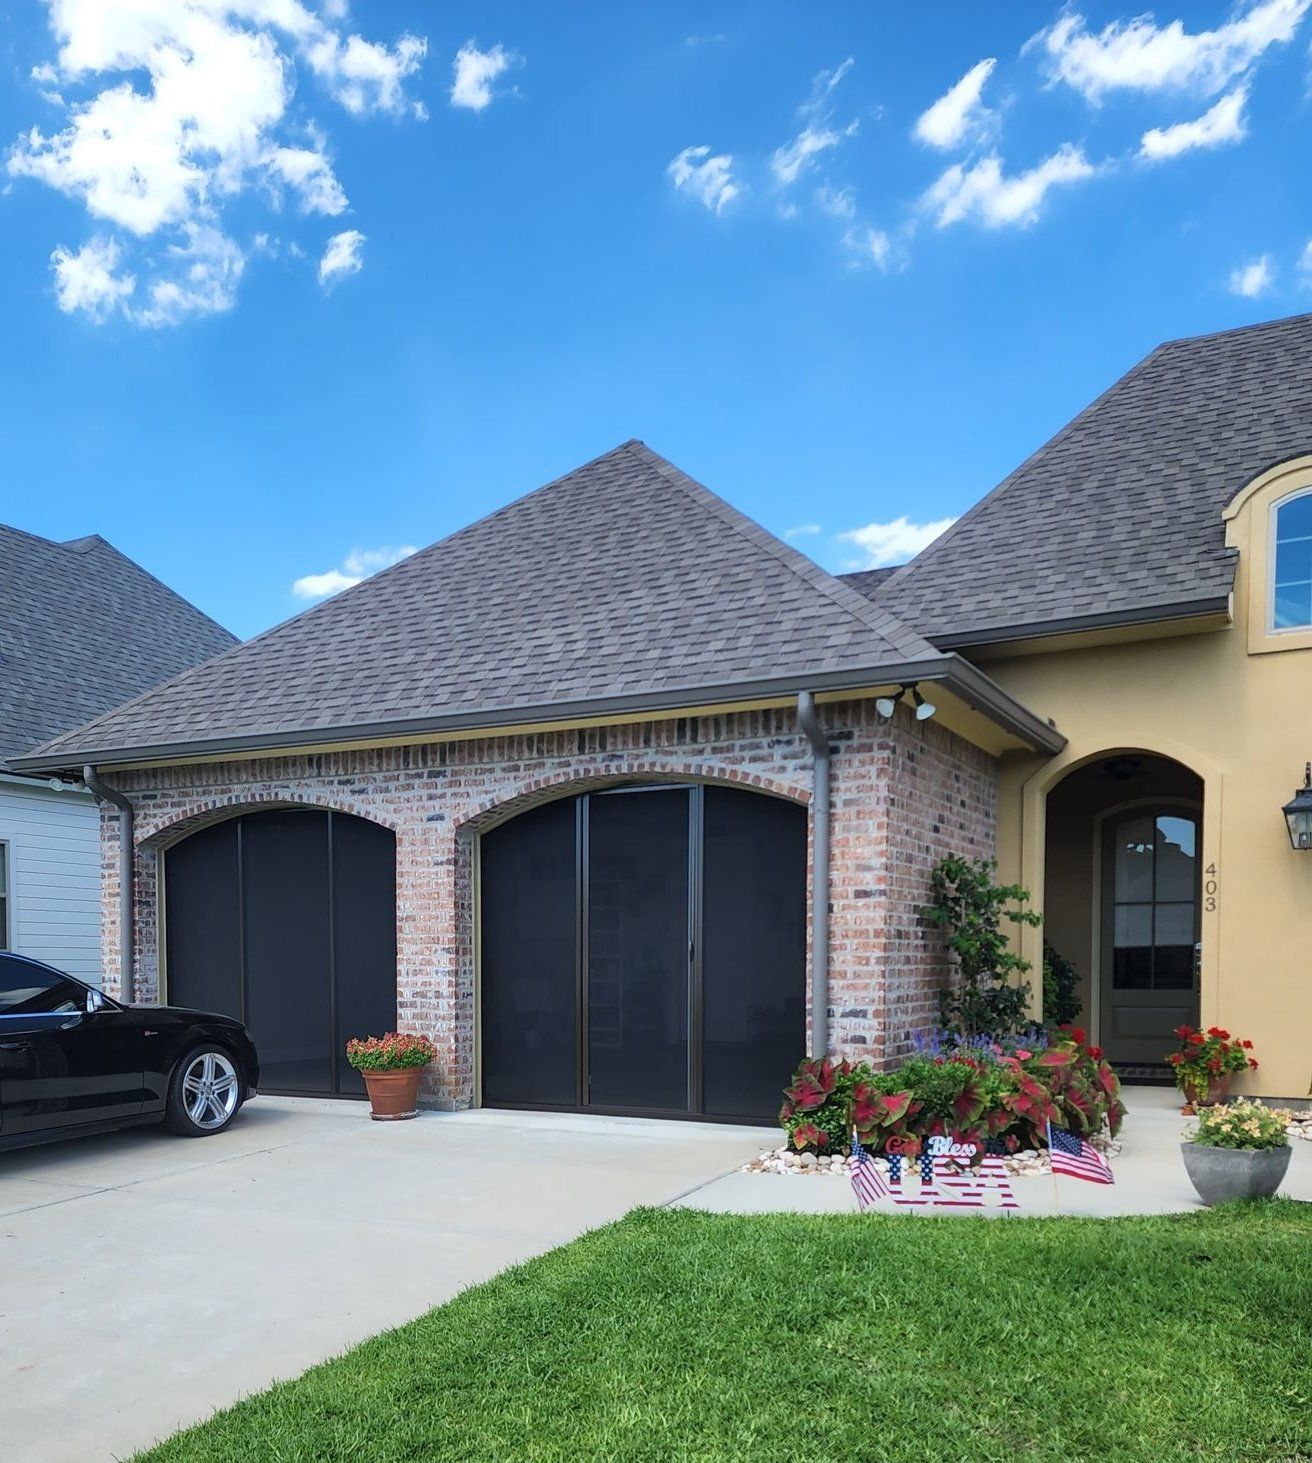 a black car is parked in front of a house